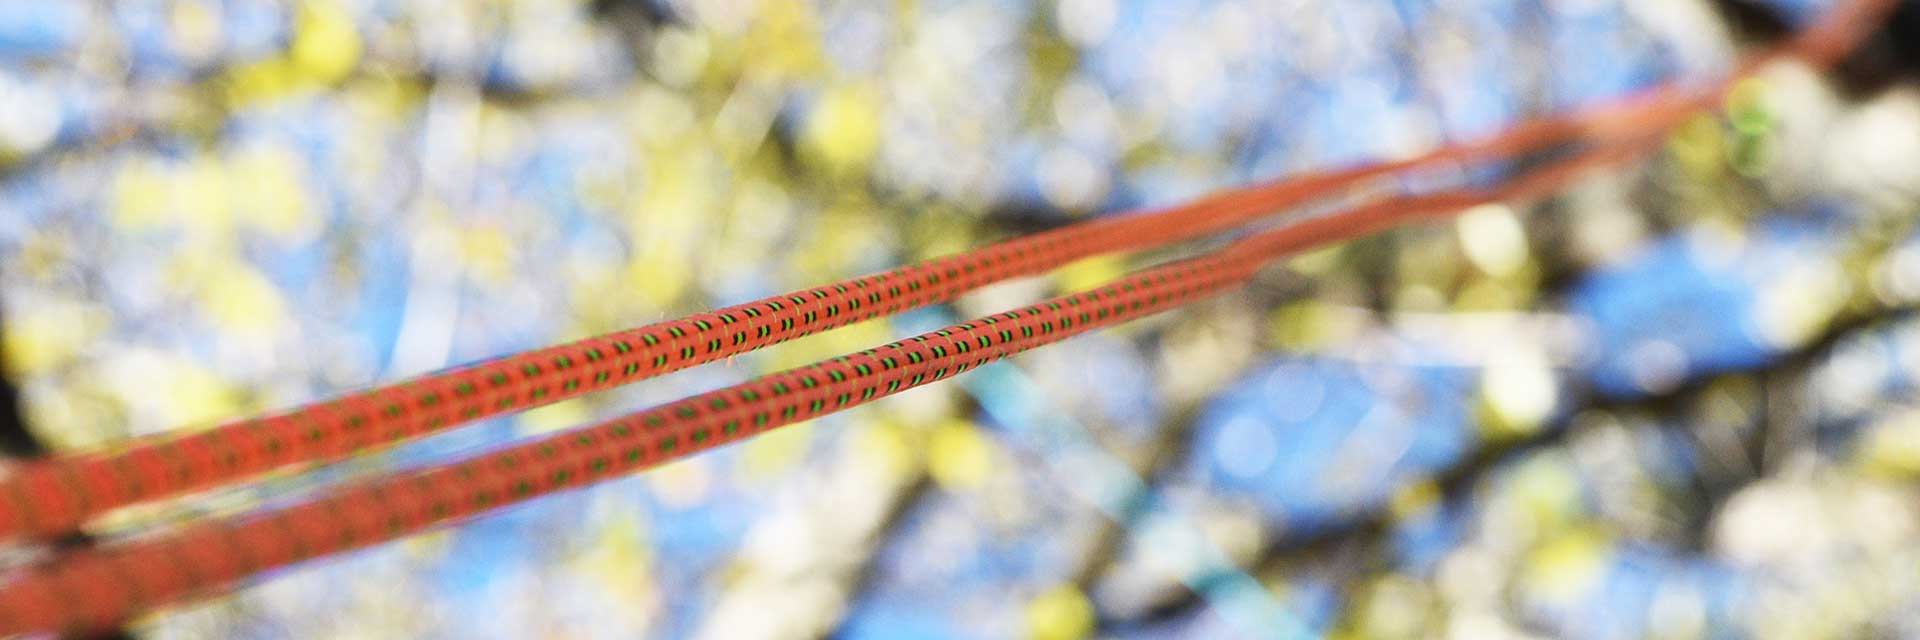 image of Rope in a tree